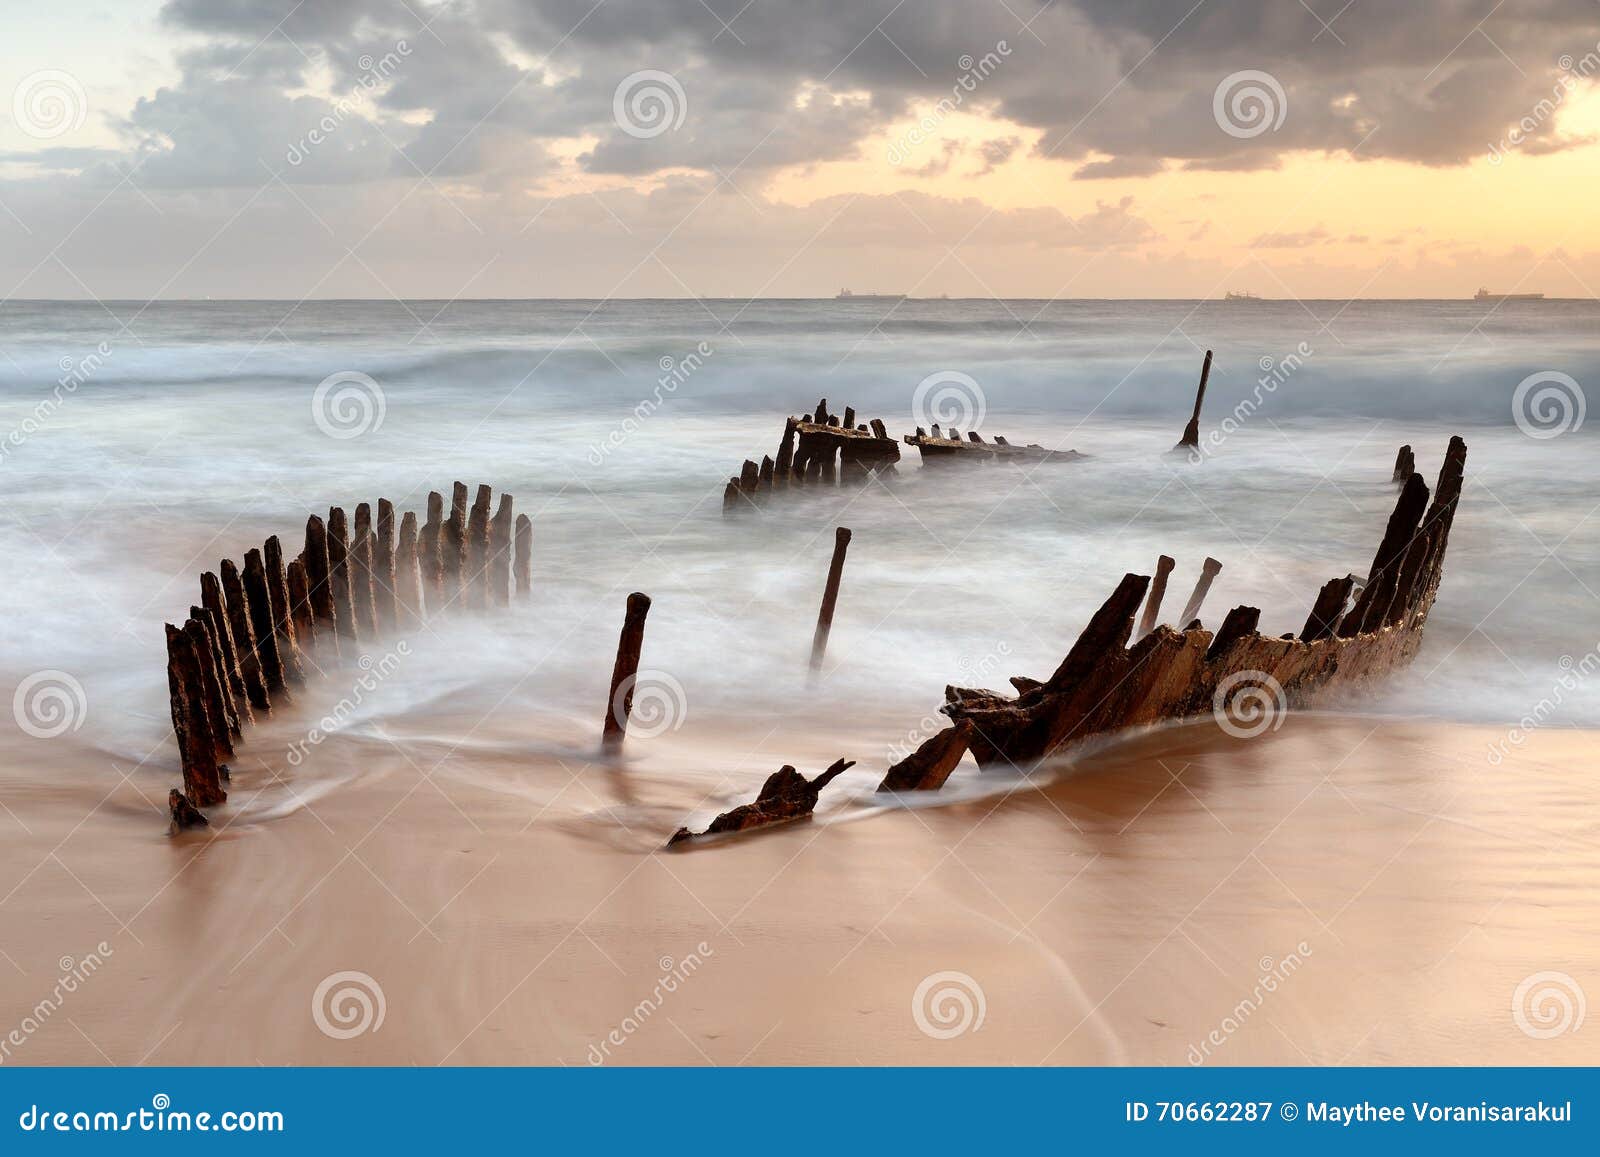 dicky wreck at sunrise